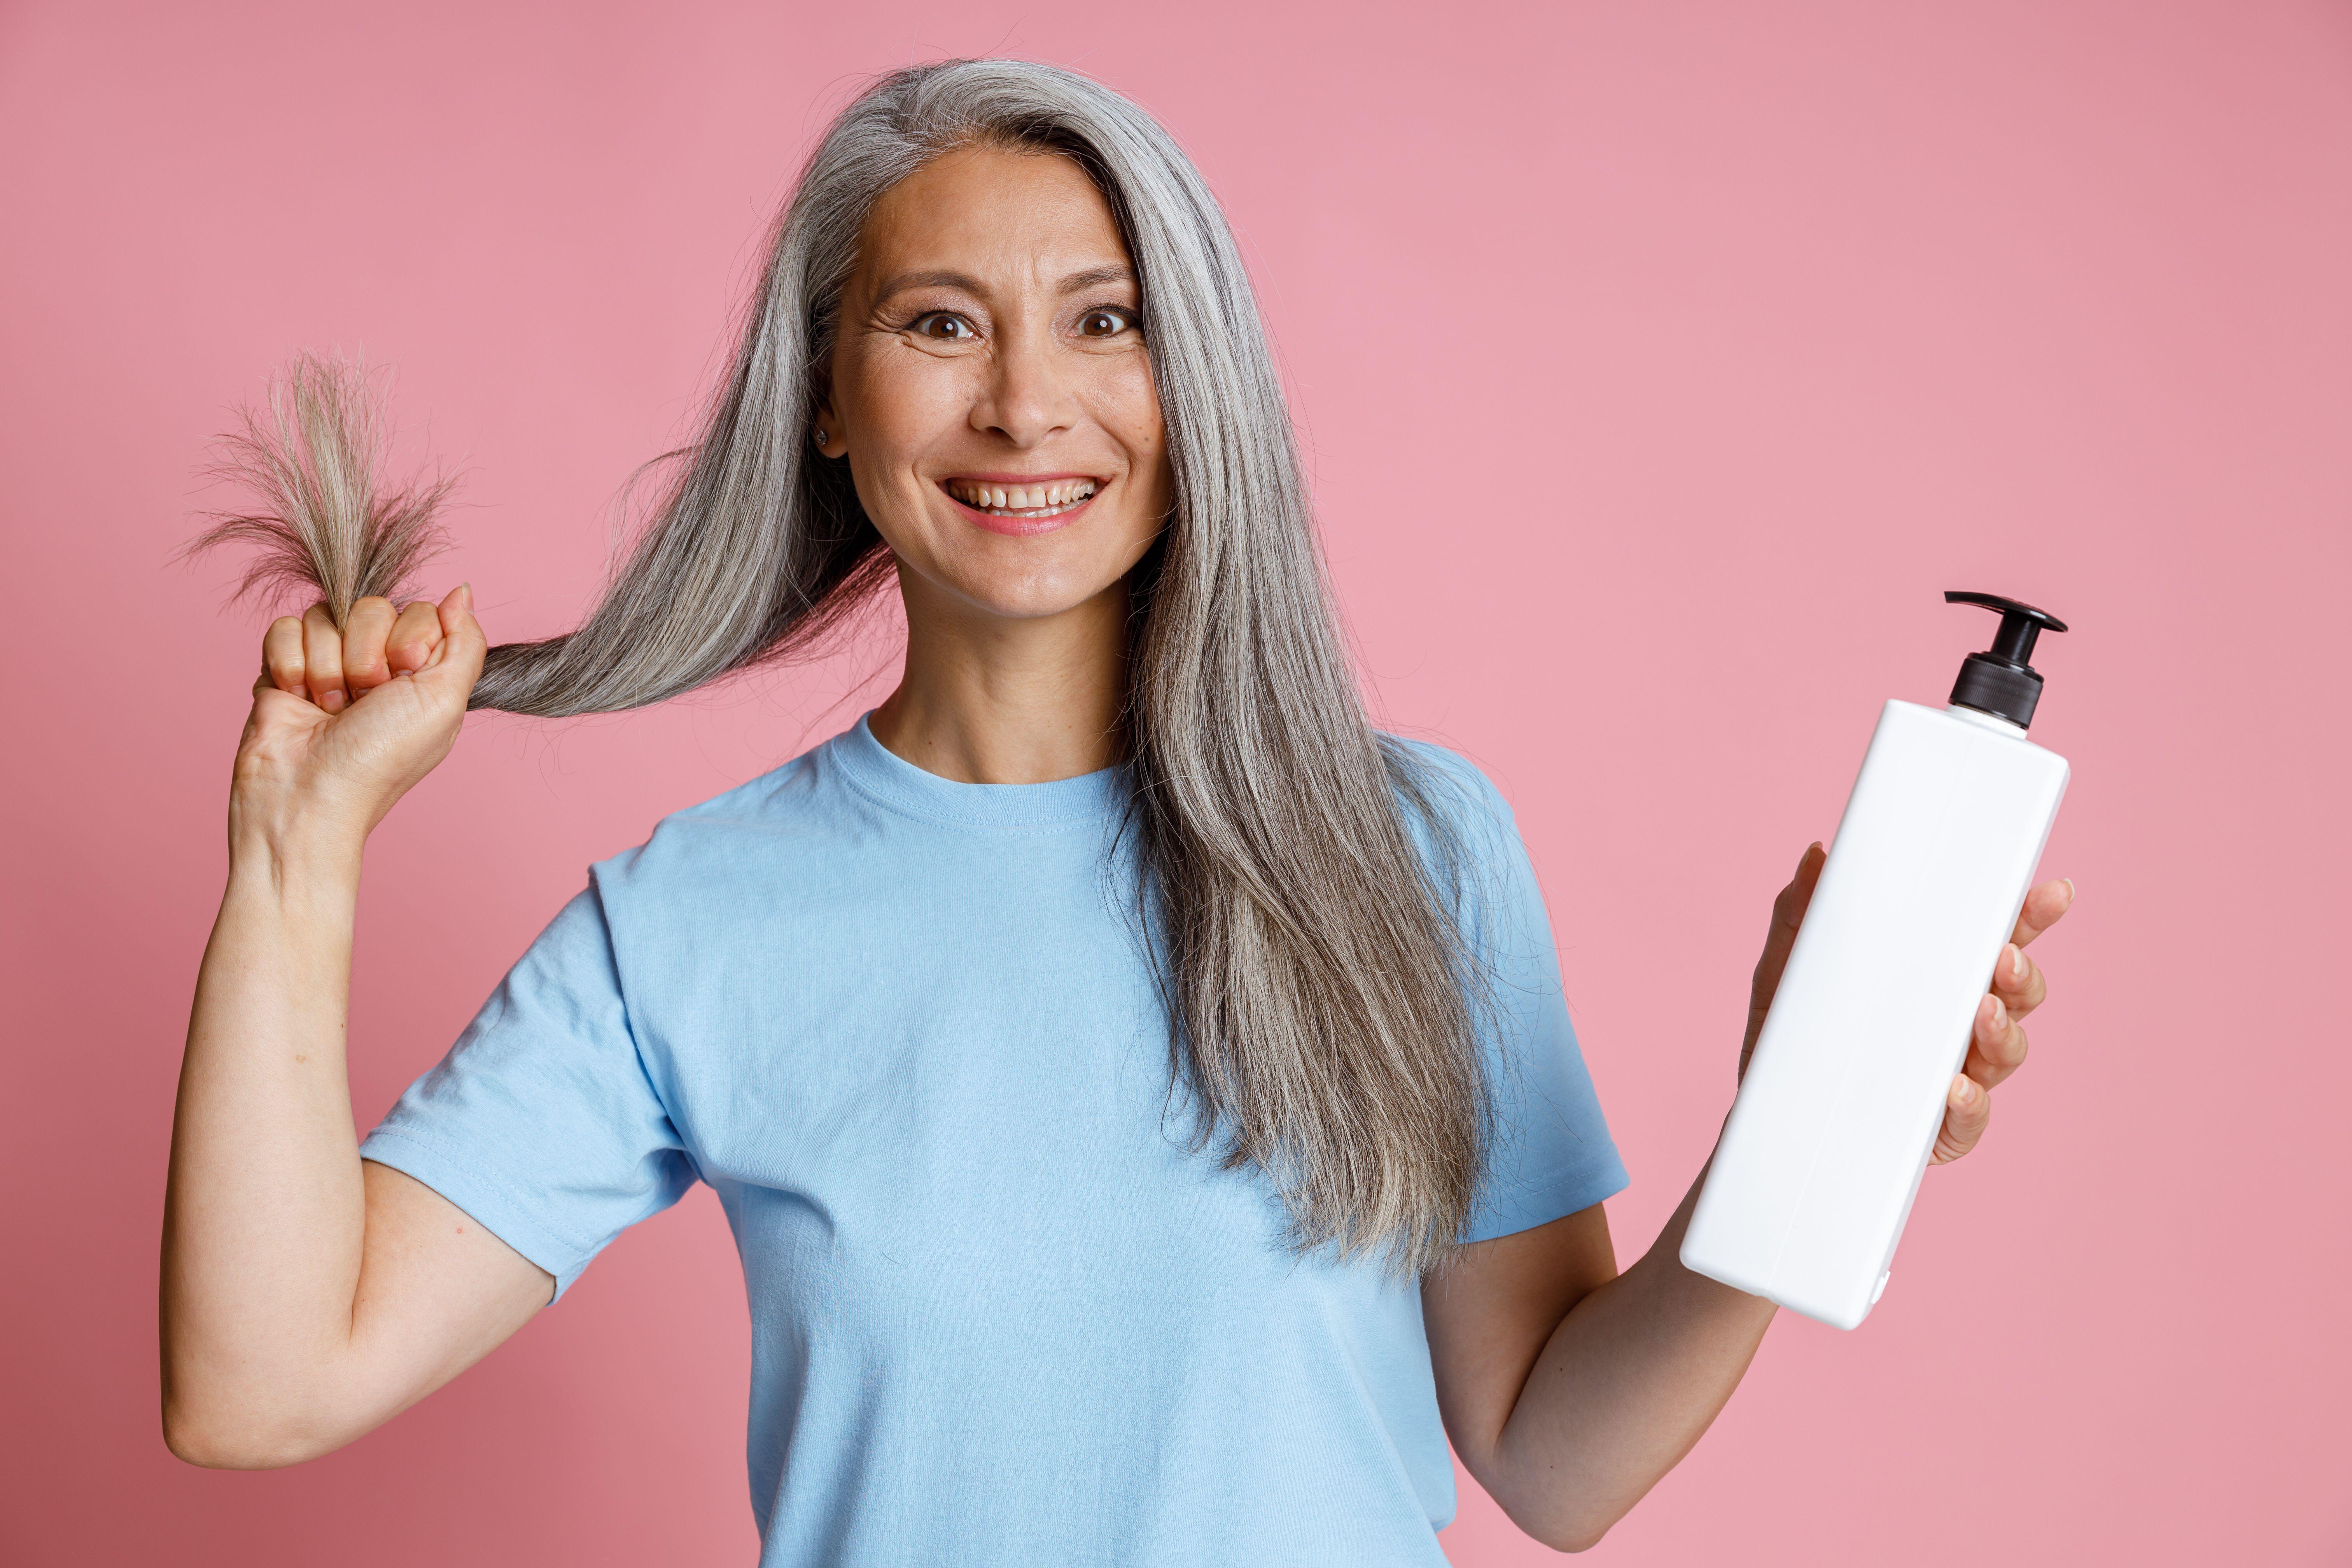 Woman with long grey hair holding a bottle of hair product, standing against a pink background, looking happy and confident